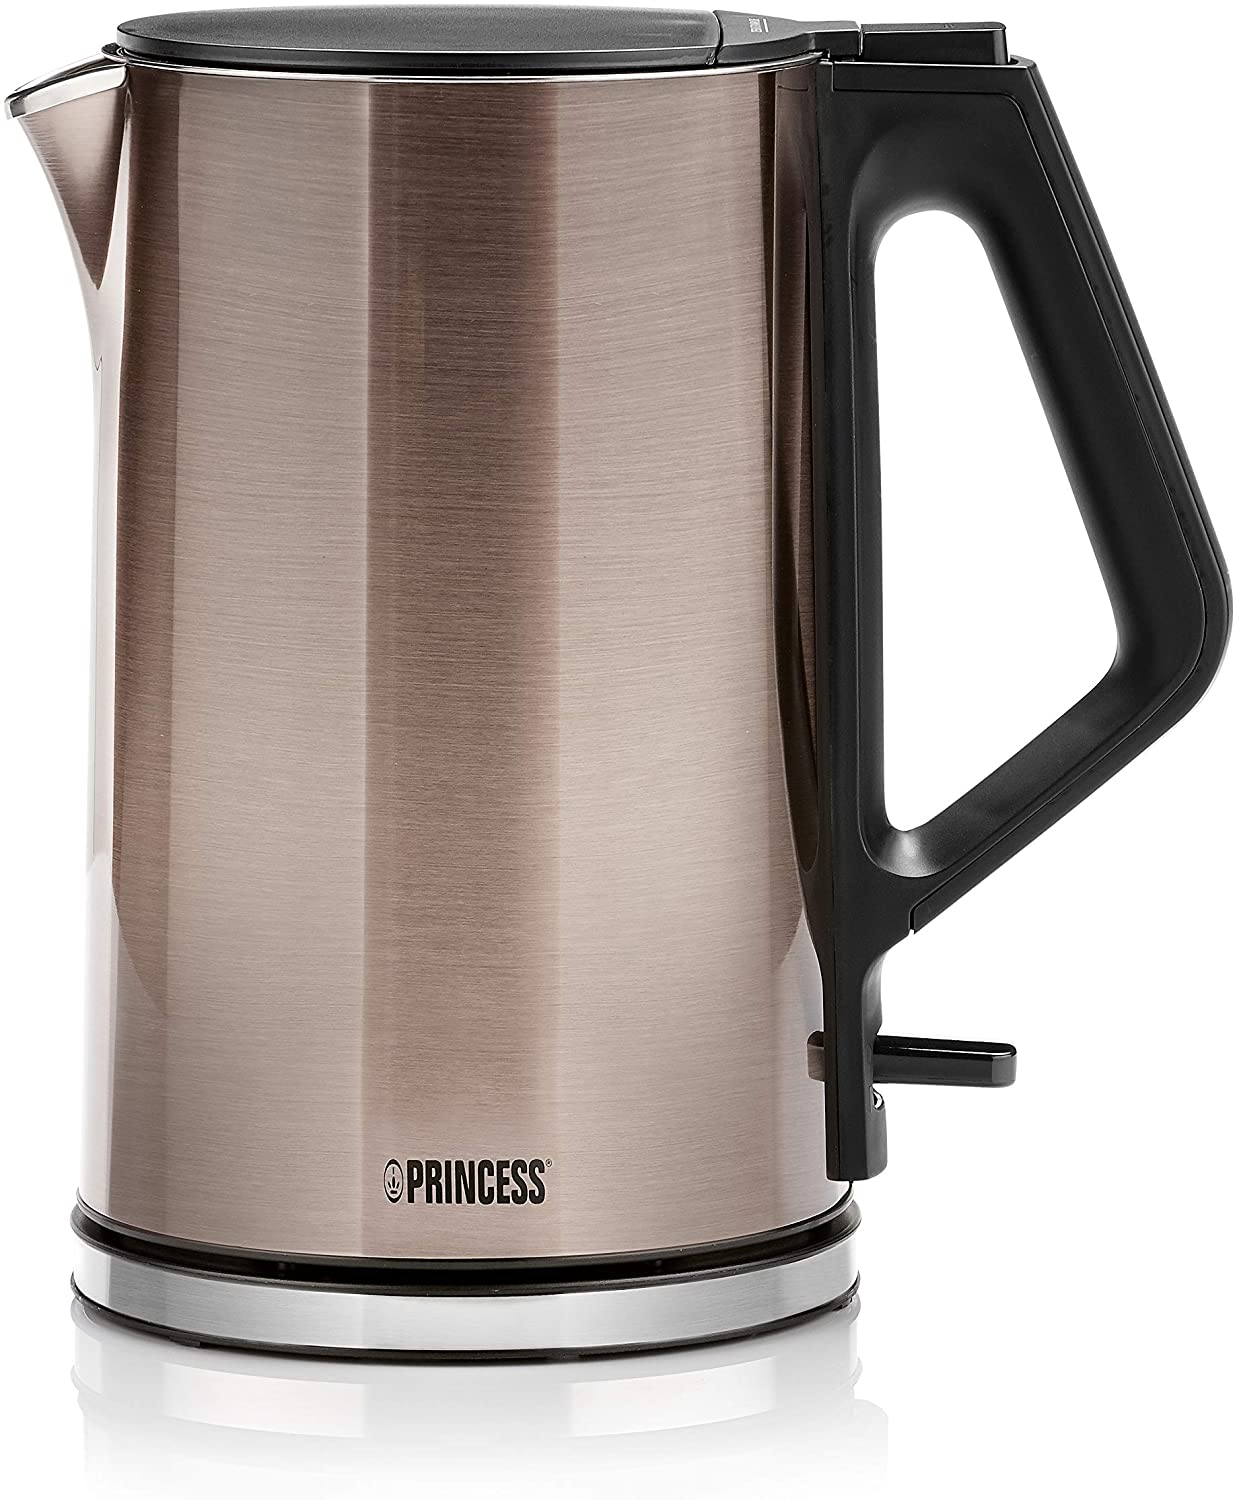 Princess Design kettle [1.5 L] - with double-walled stainless steel housing for safe touch - 360° rotatable with water level indicator, 236024